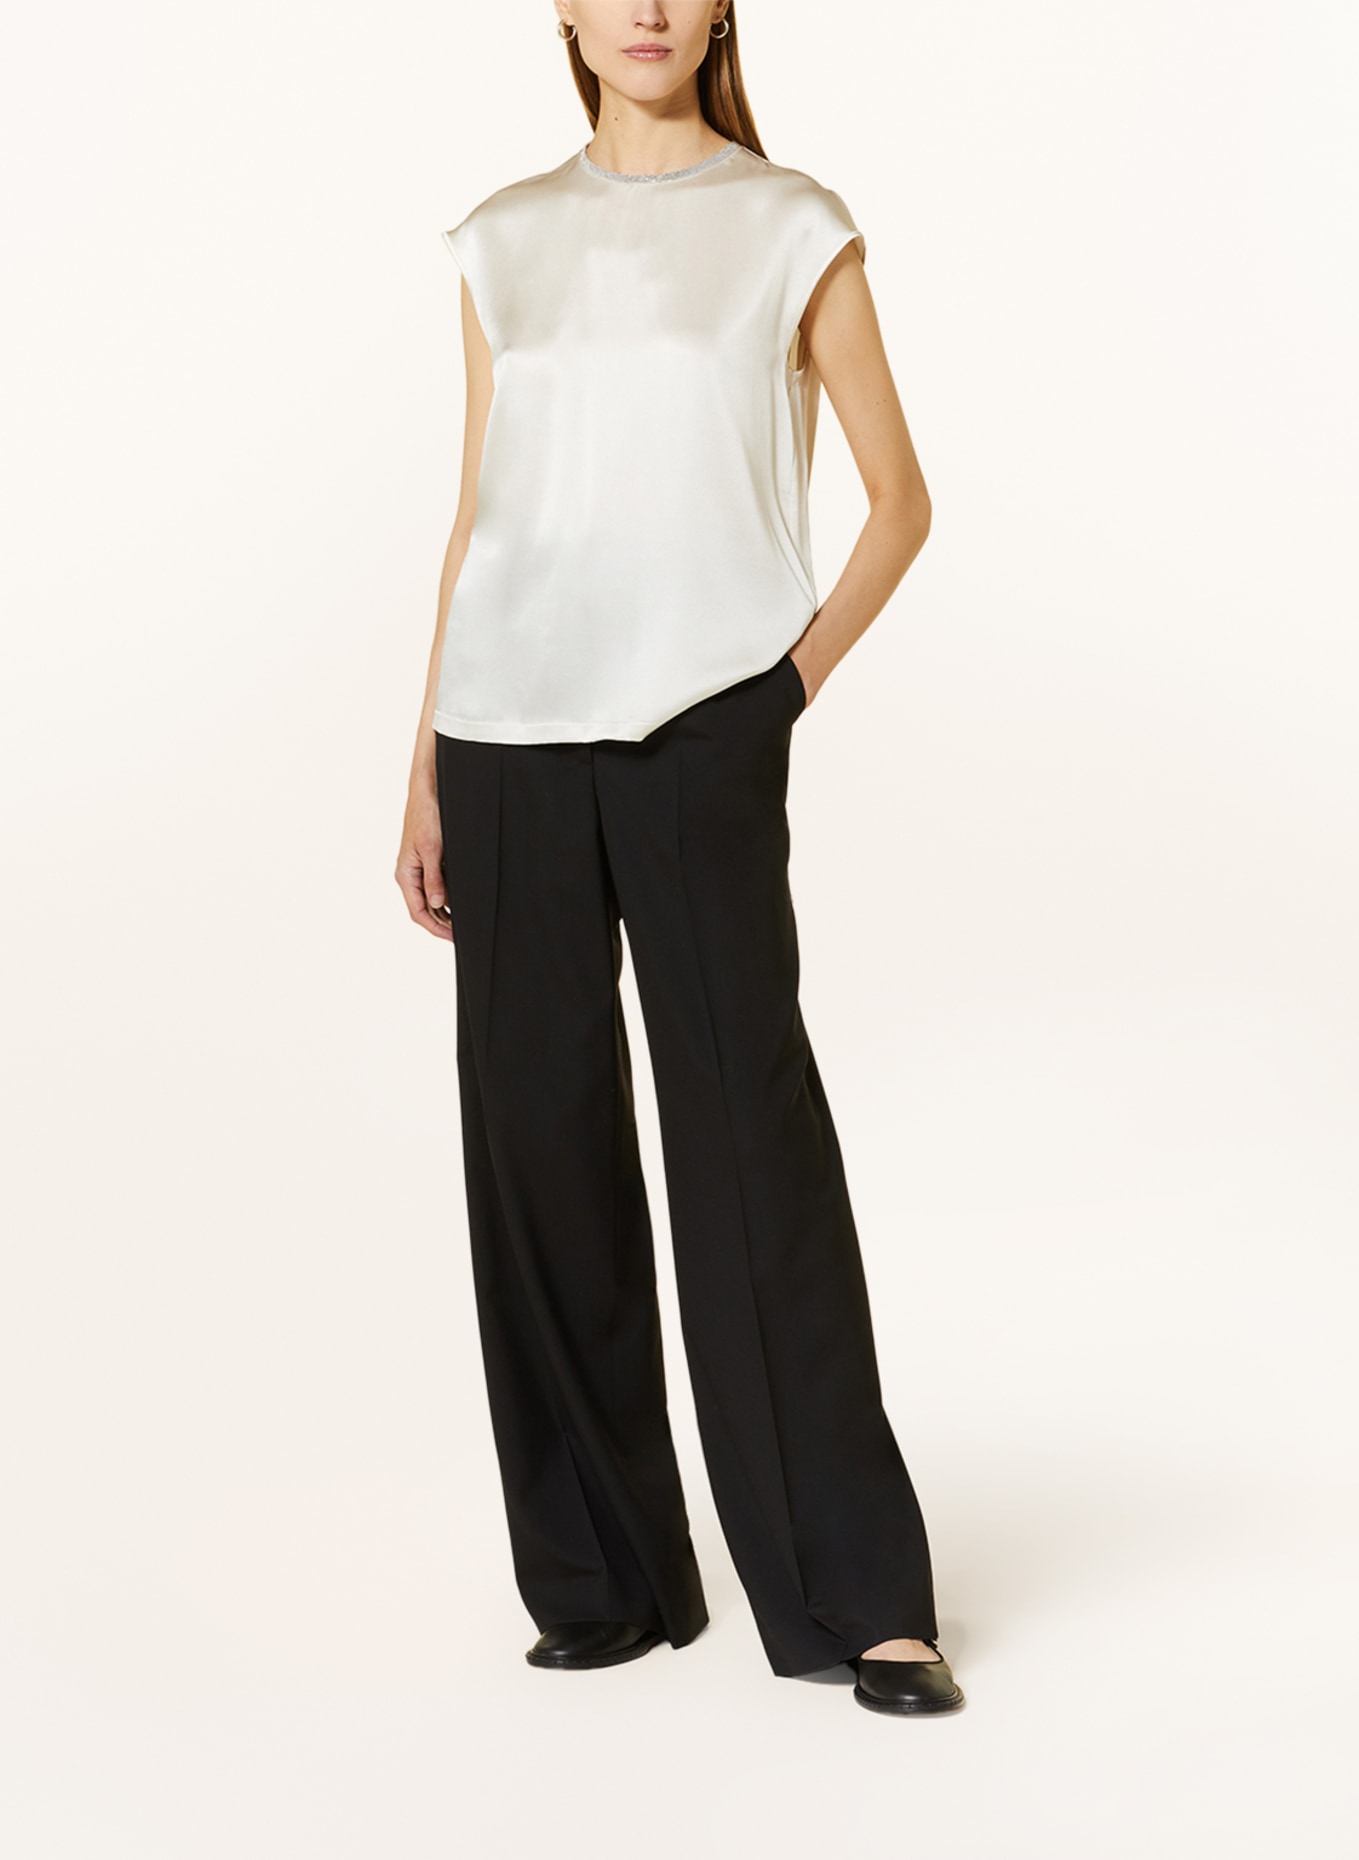 FABIANA FILIPPI Blouse top made of silk with decorative beads, Color: CREAM (Image 2)